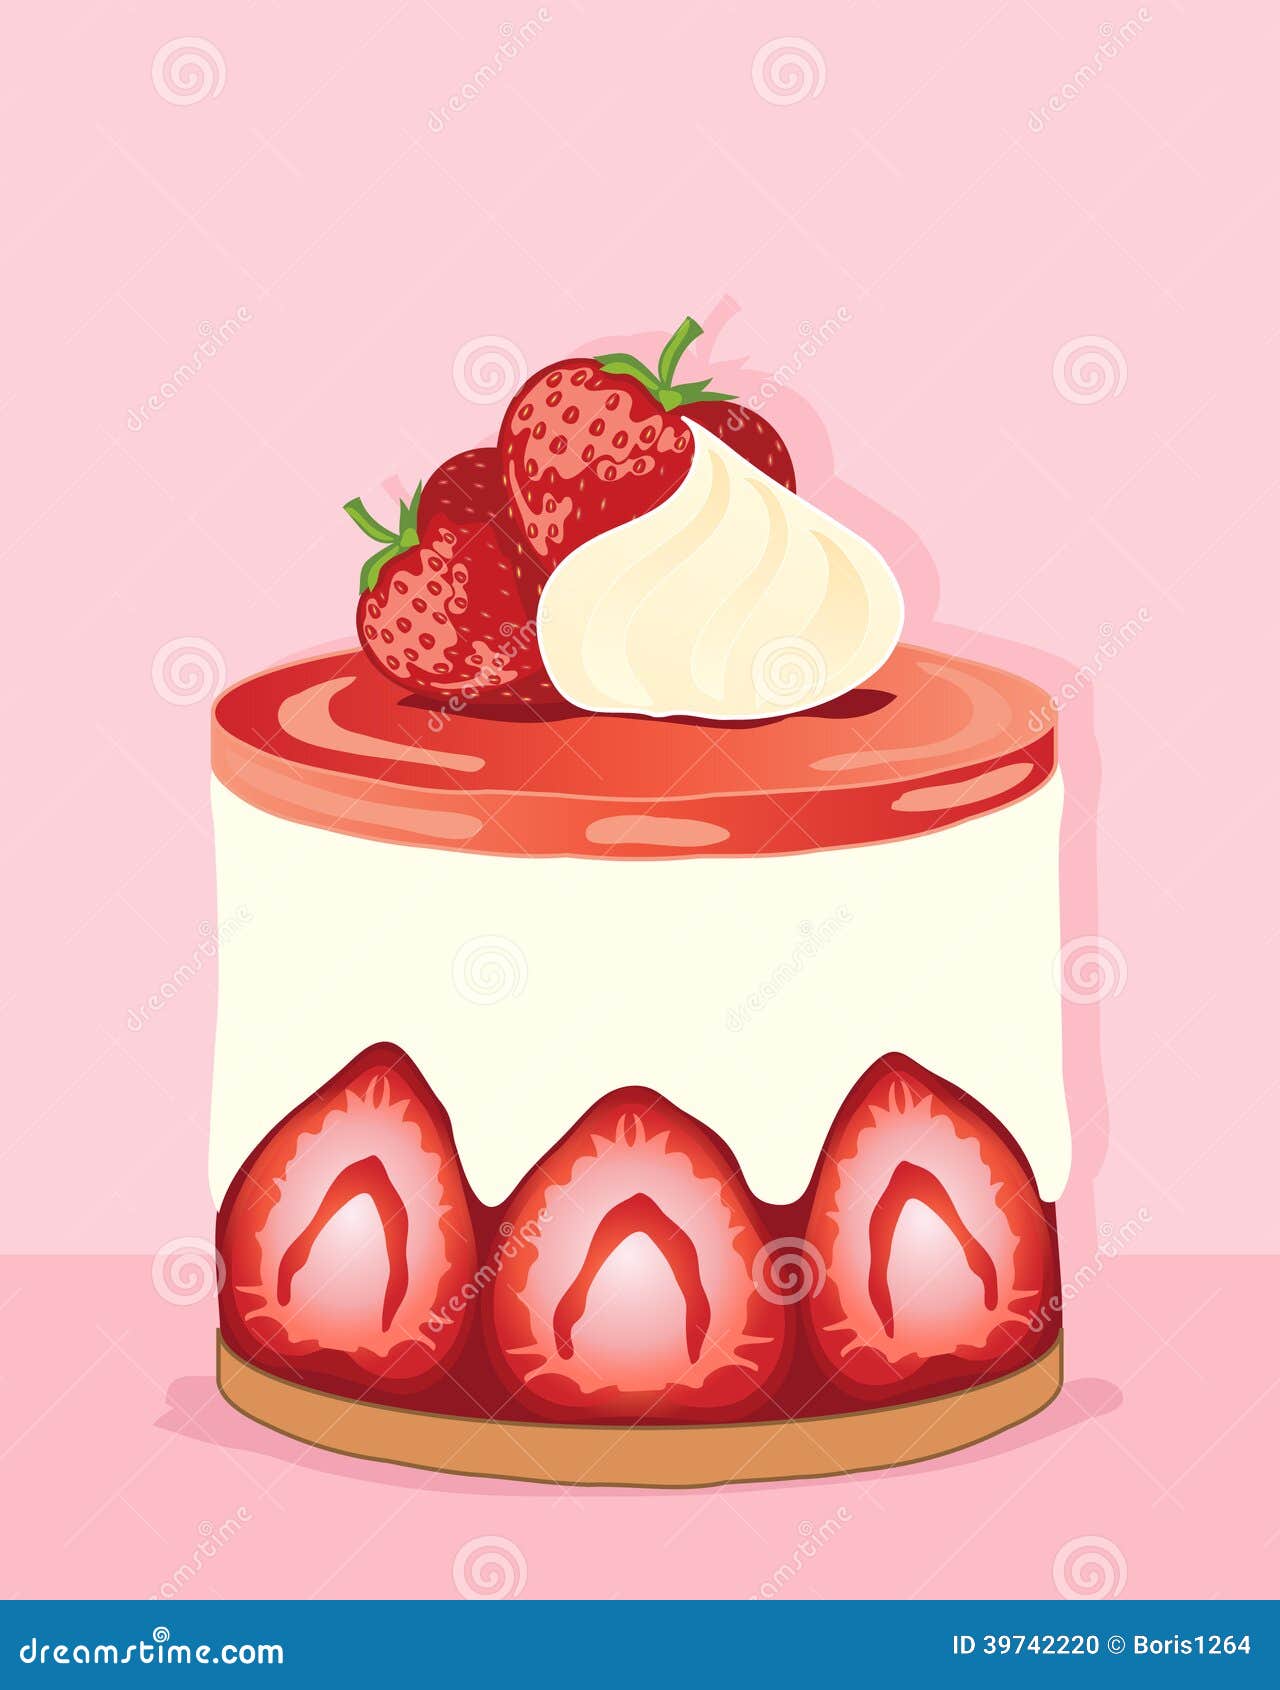 How To Draw Funny Cheesecake 